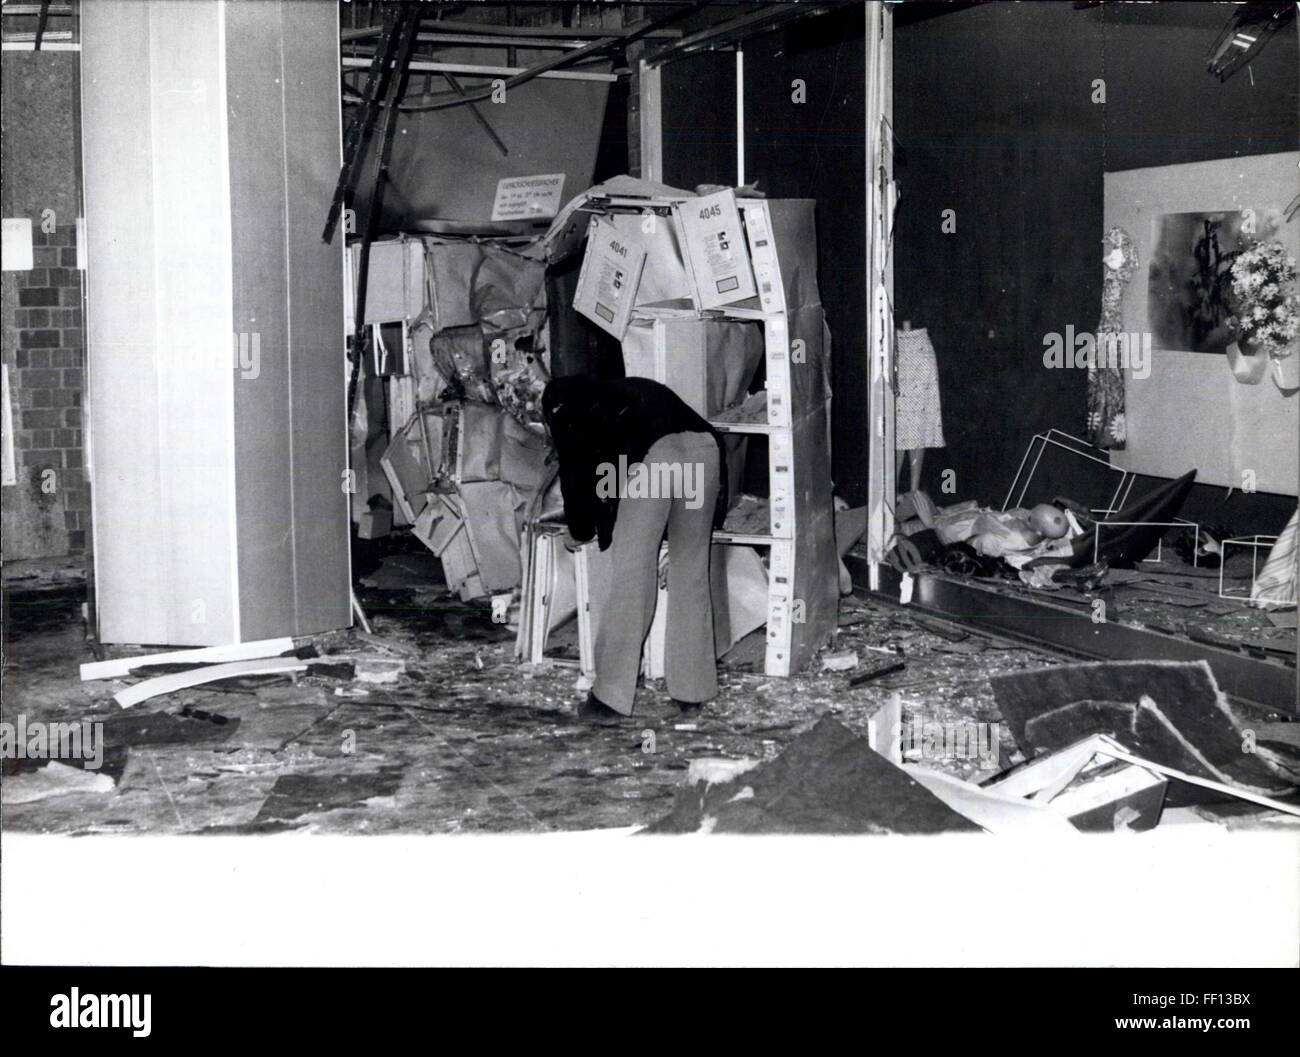 1976 - Bomb attempt in Centre of Munich: In the main subway station of Munich, the Stachus, a bomb exploded in one of the luggage lockers in the night of May 14th, 1976. The explosion brought down the ceiling of about 1200 square metres and many windows of nearby shops were smashed. No persons were injured. The police assume, that the bomb attempt is connected with the death of leader Ulrike Meinhof of the ''baader/Meinhof Group'', who had committed suicide in prison on May 9th. Photo shows a police officer searching the contents of the wrecked luggage lockers. (Credit Image: © Keystone Pictur Stock Photo